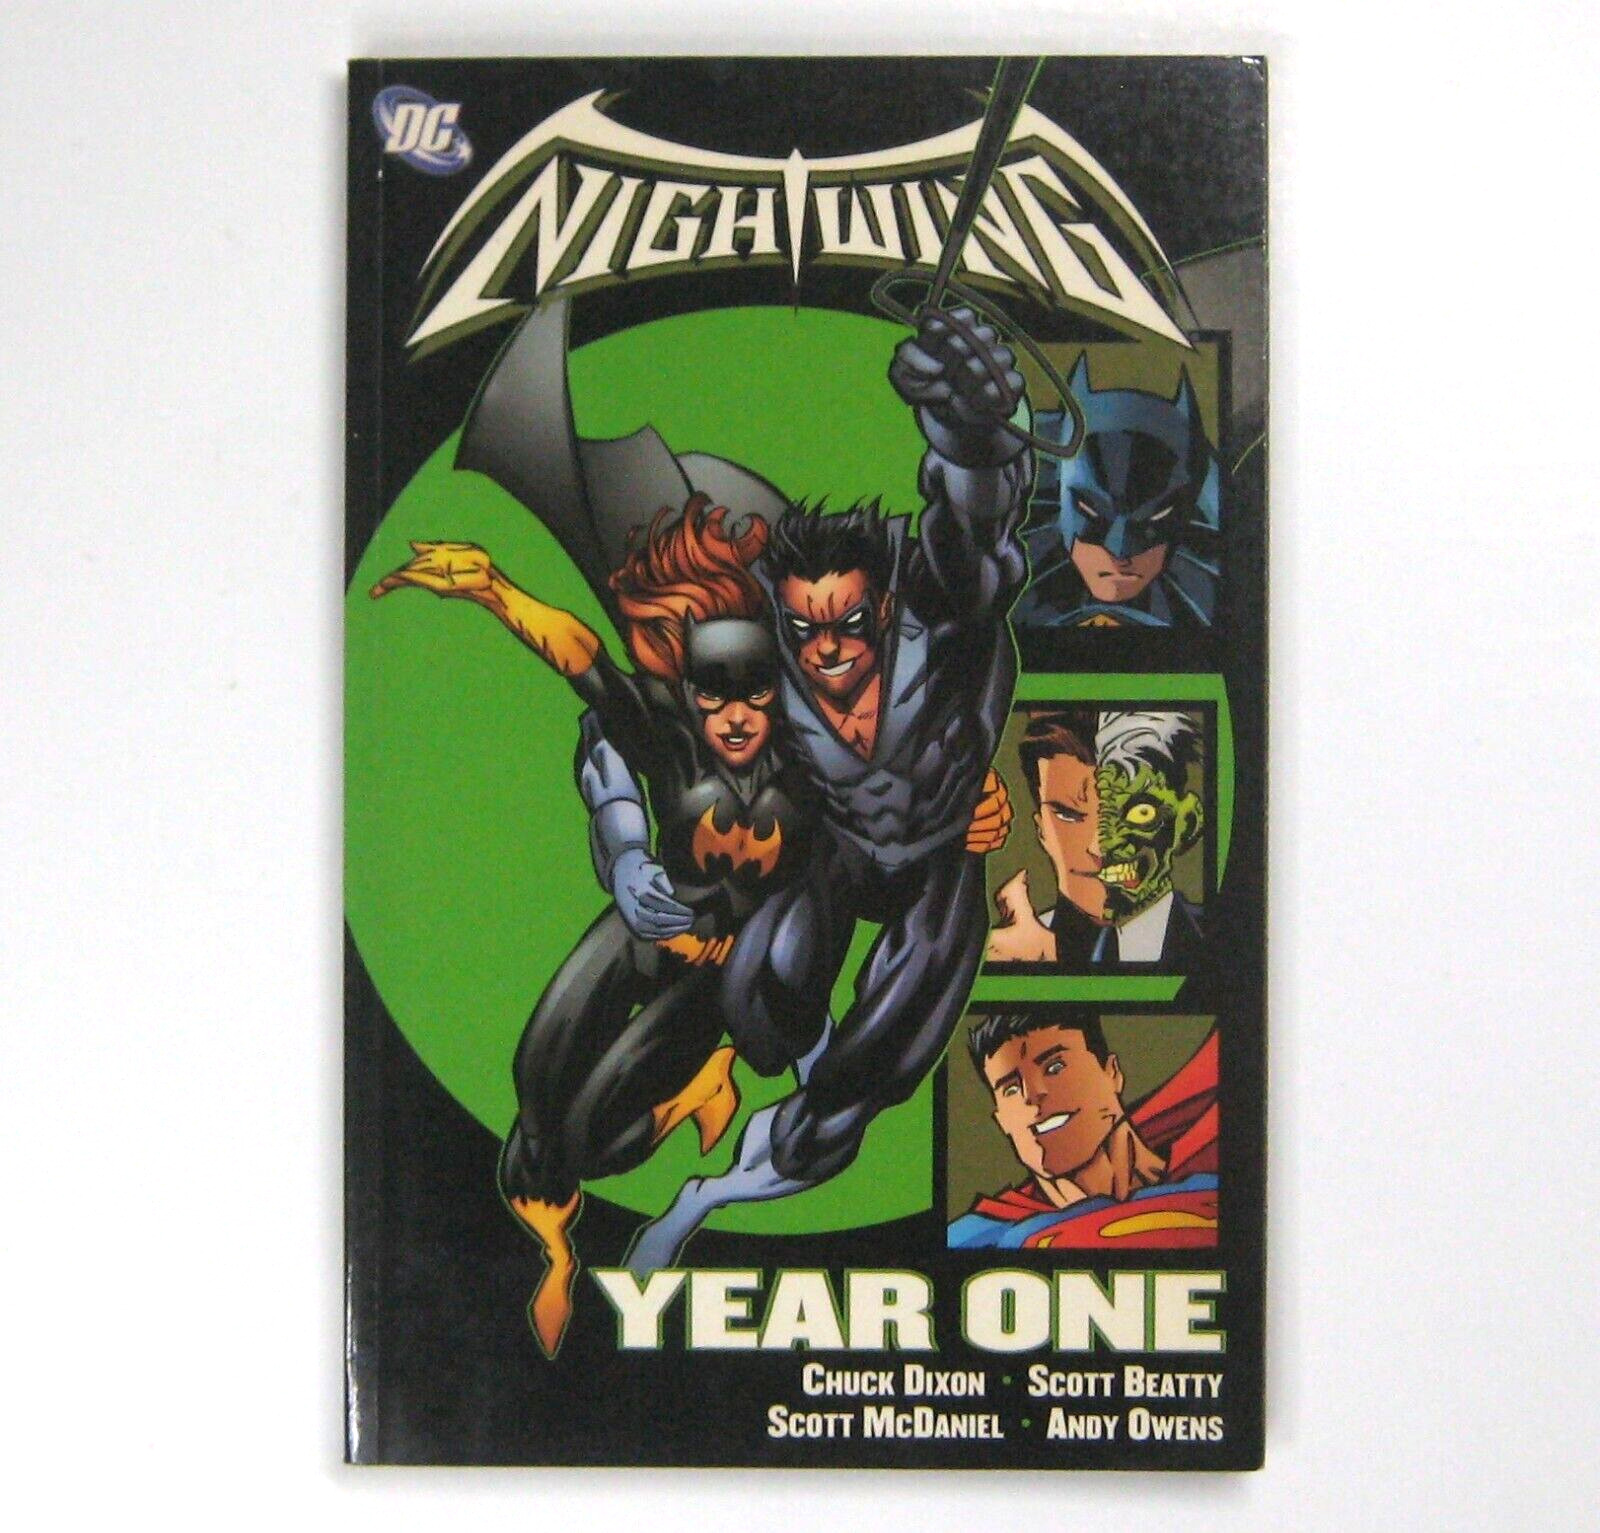 Nightwing Year One First Printing 2005 DC Comics Softcover Comic Graphic Novel